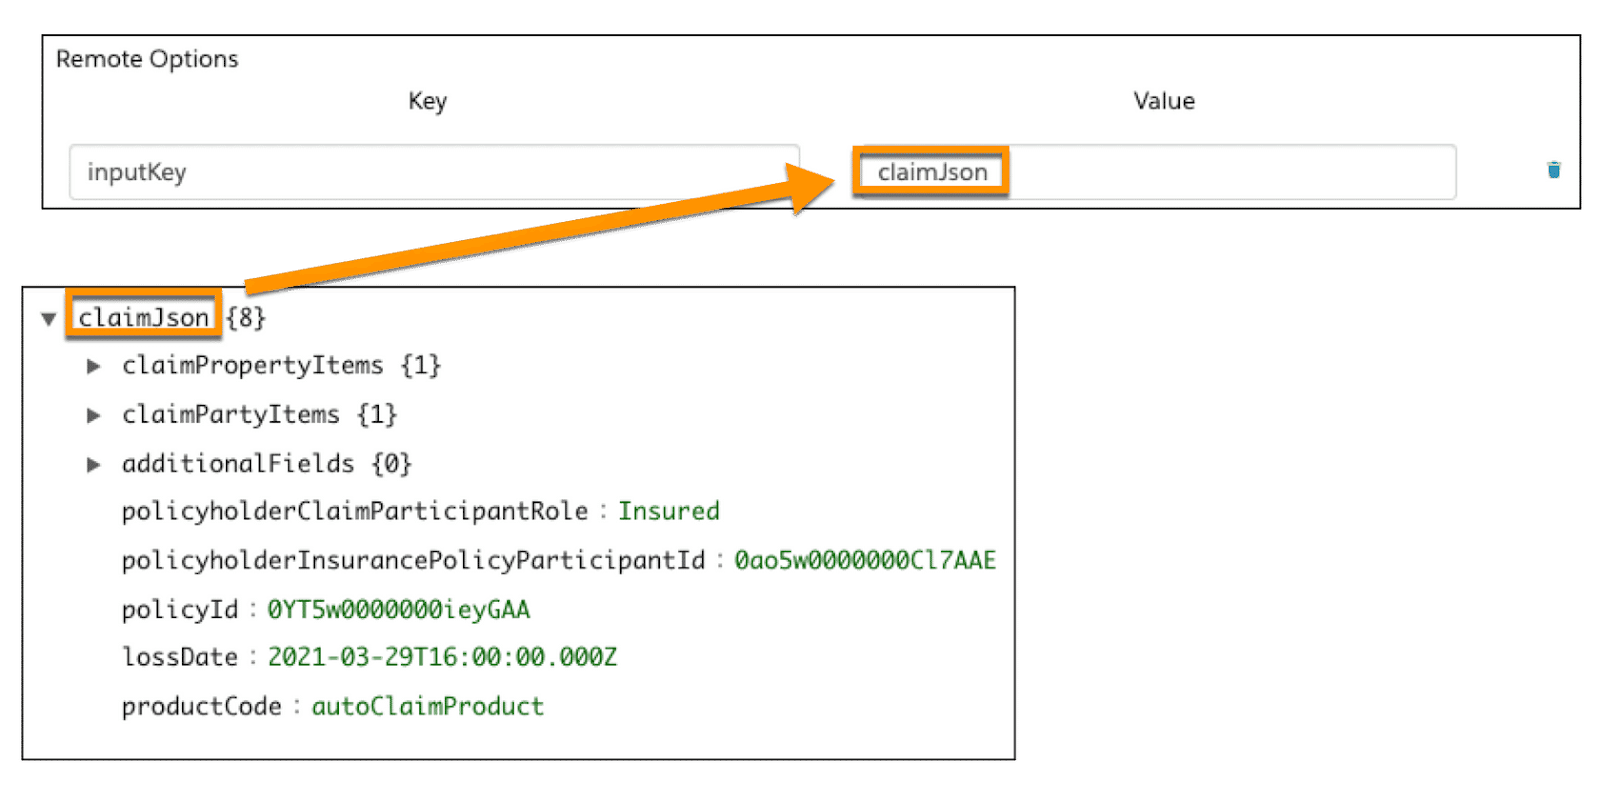 Arrow pointing from the top level of the JSON, claimJson, to the same value for the inputKey in the remote options.